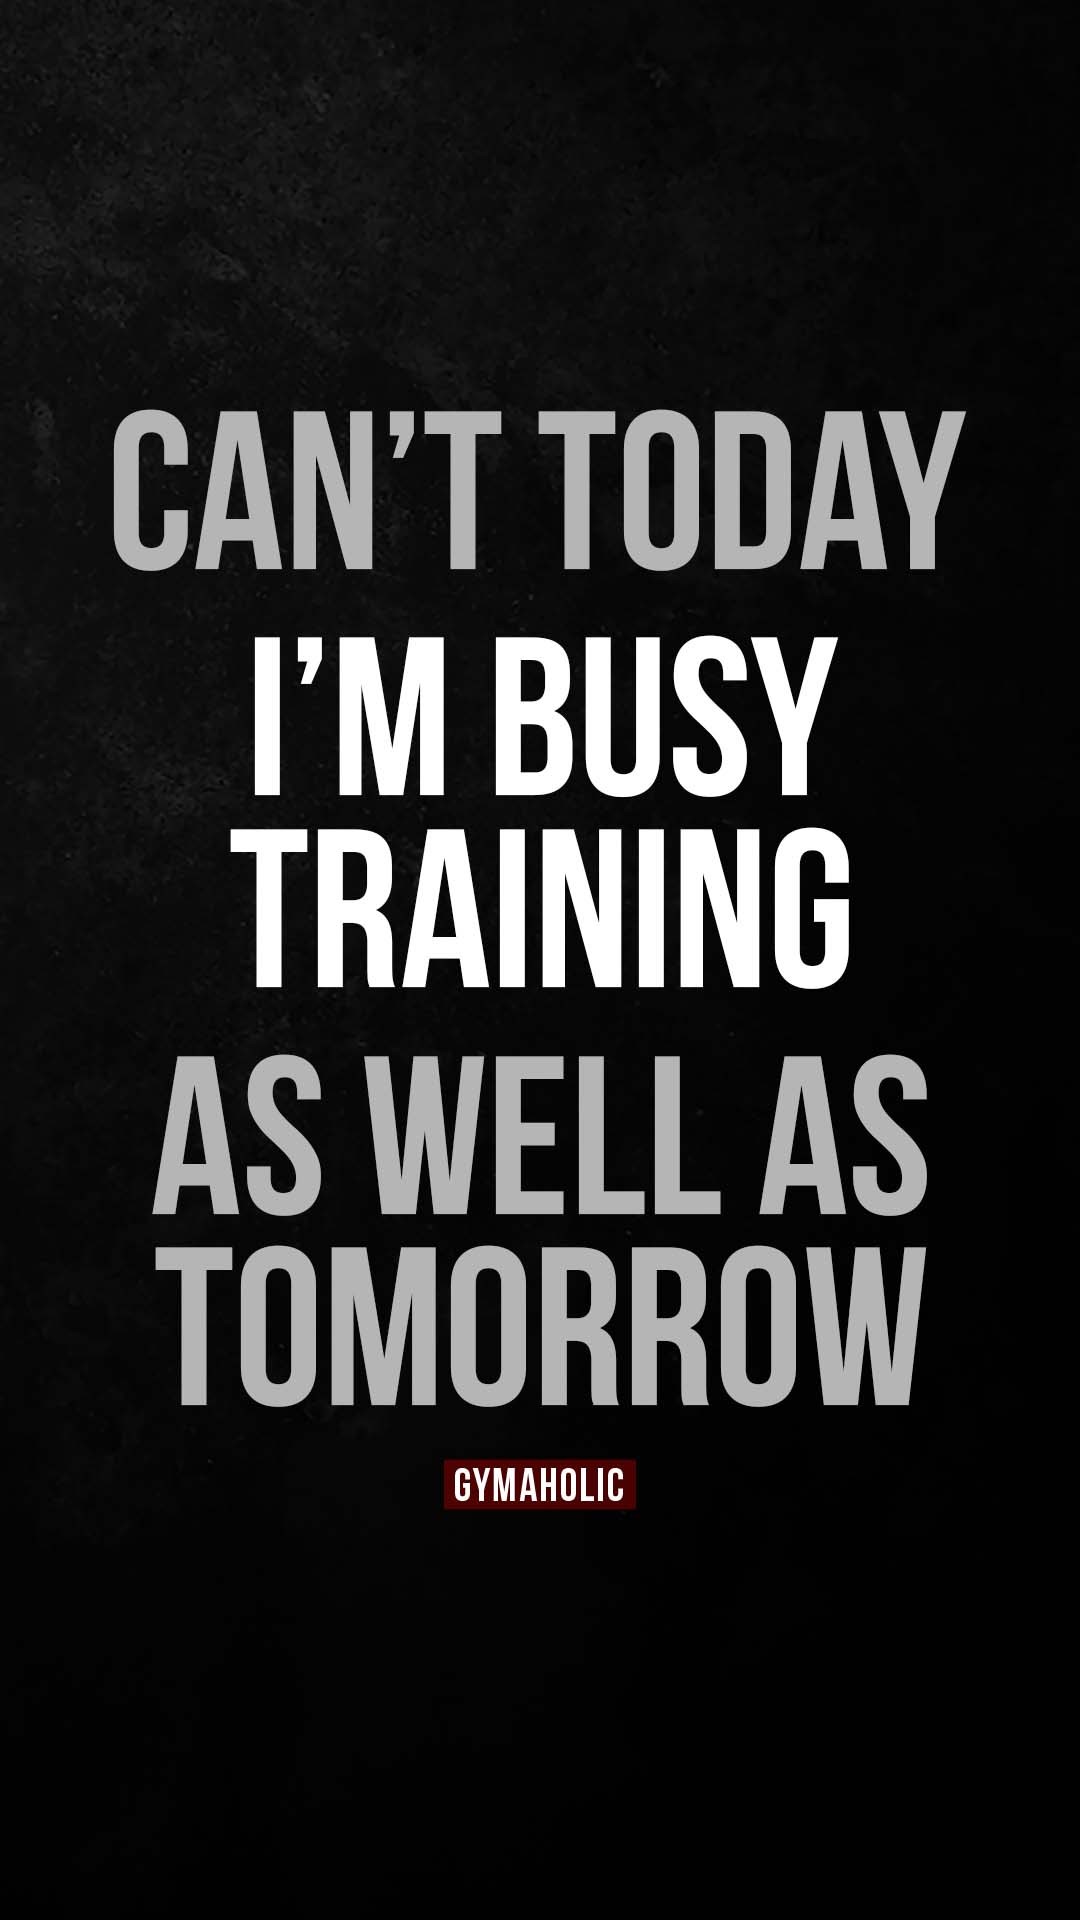 Can’t today, I’m busy training